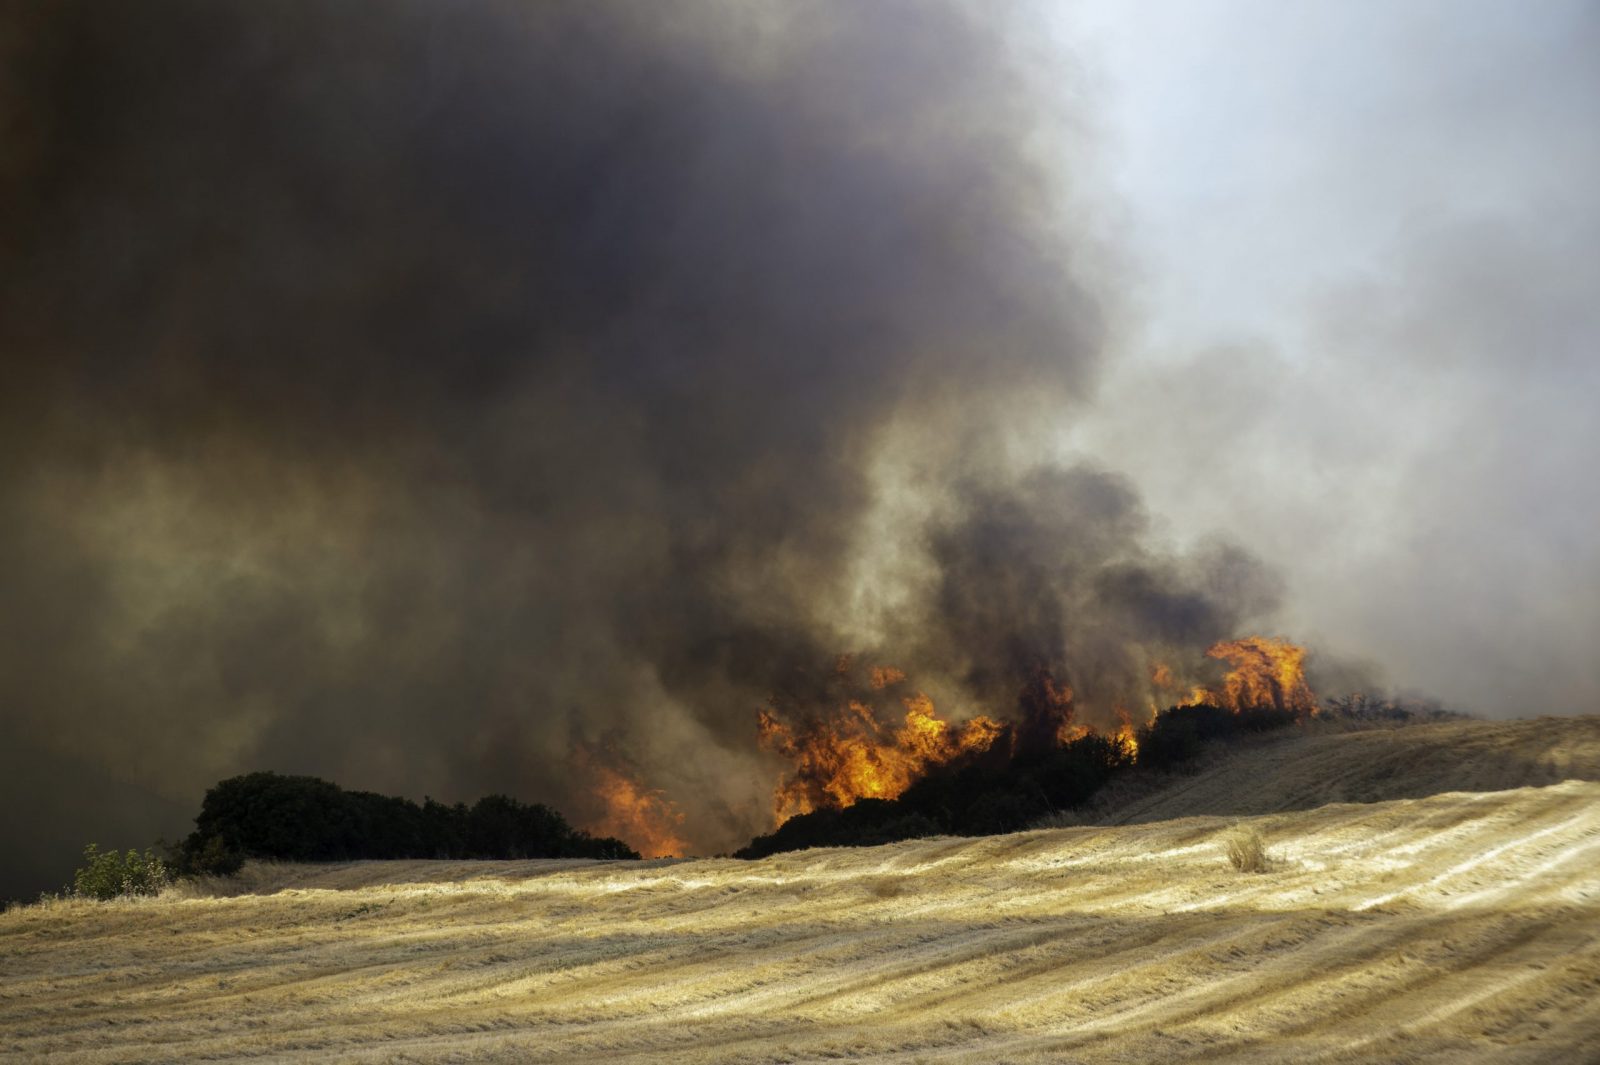 epa10771926 A fire burns fields, in Velestino, Magnesia prefecture, Greece, 27 July 2023. Wildfires were rekindled in the greater Volos area, on Volos' coastal front, from the city itself to as far as Nea Anchialos, 18 km southeast of Volos, including the villages of Megali Velanidia, Marathos, and Kritharia. Another fire rekindling has also occurred at Seklo and Agios Georgios in Feres (east of Velestino, where the fire first started on 26 July), heading to Kastraki and Mikrothives, west of Volos.  EPA/IKONOMOU VASSILIS